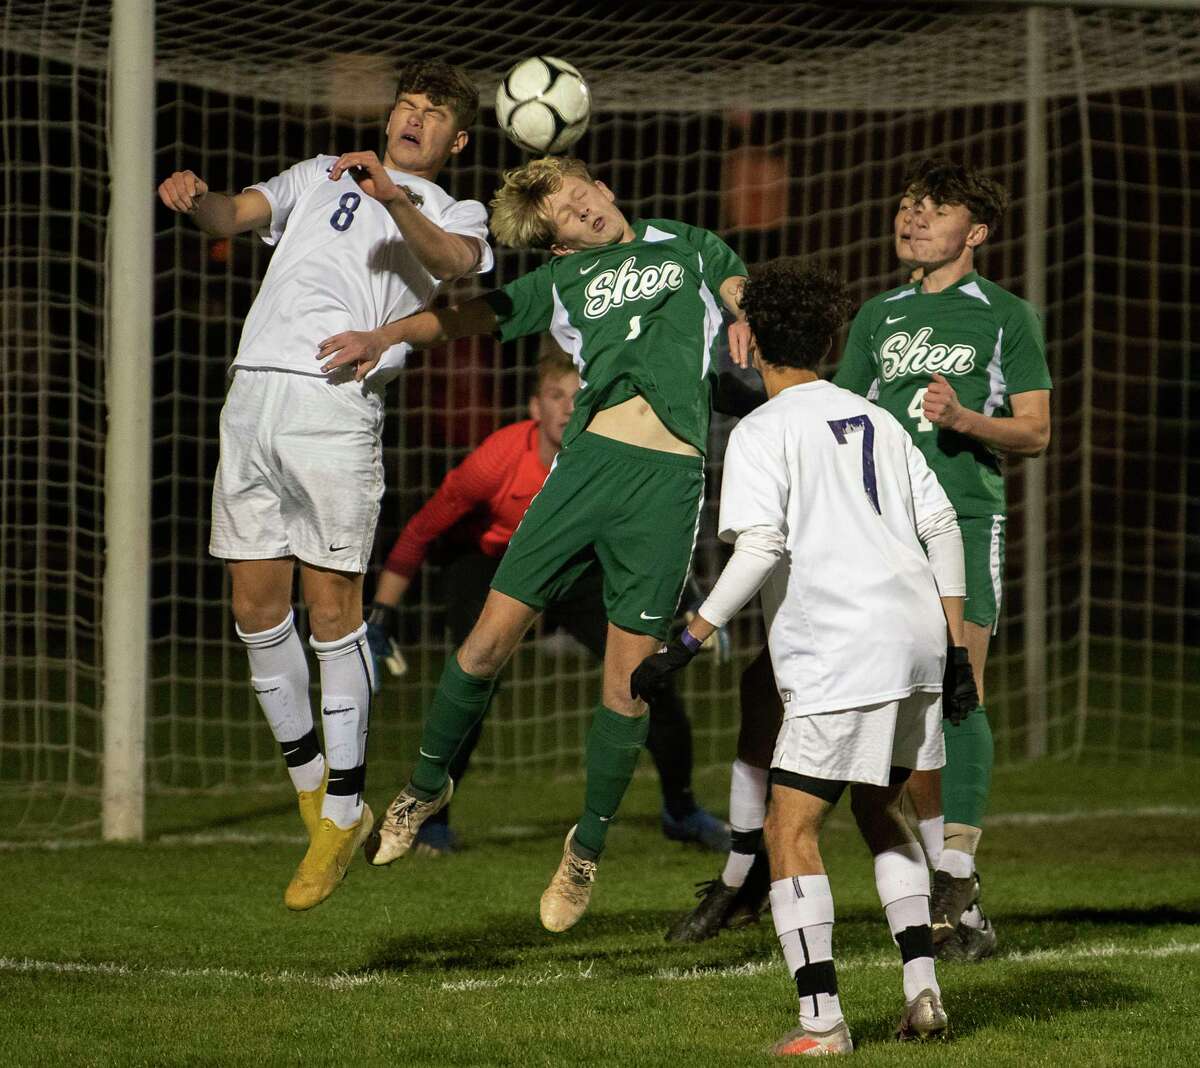 CBA’s Benjamin Bern, left, battles to head the ball with Shenendehowa’s Conor Brown in corner kick attempt during the Class AA boys' soccer final on Monday, Nov. 1, 2021 in Colonie, N.Y.